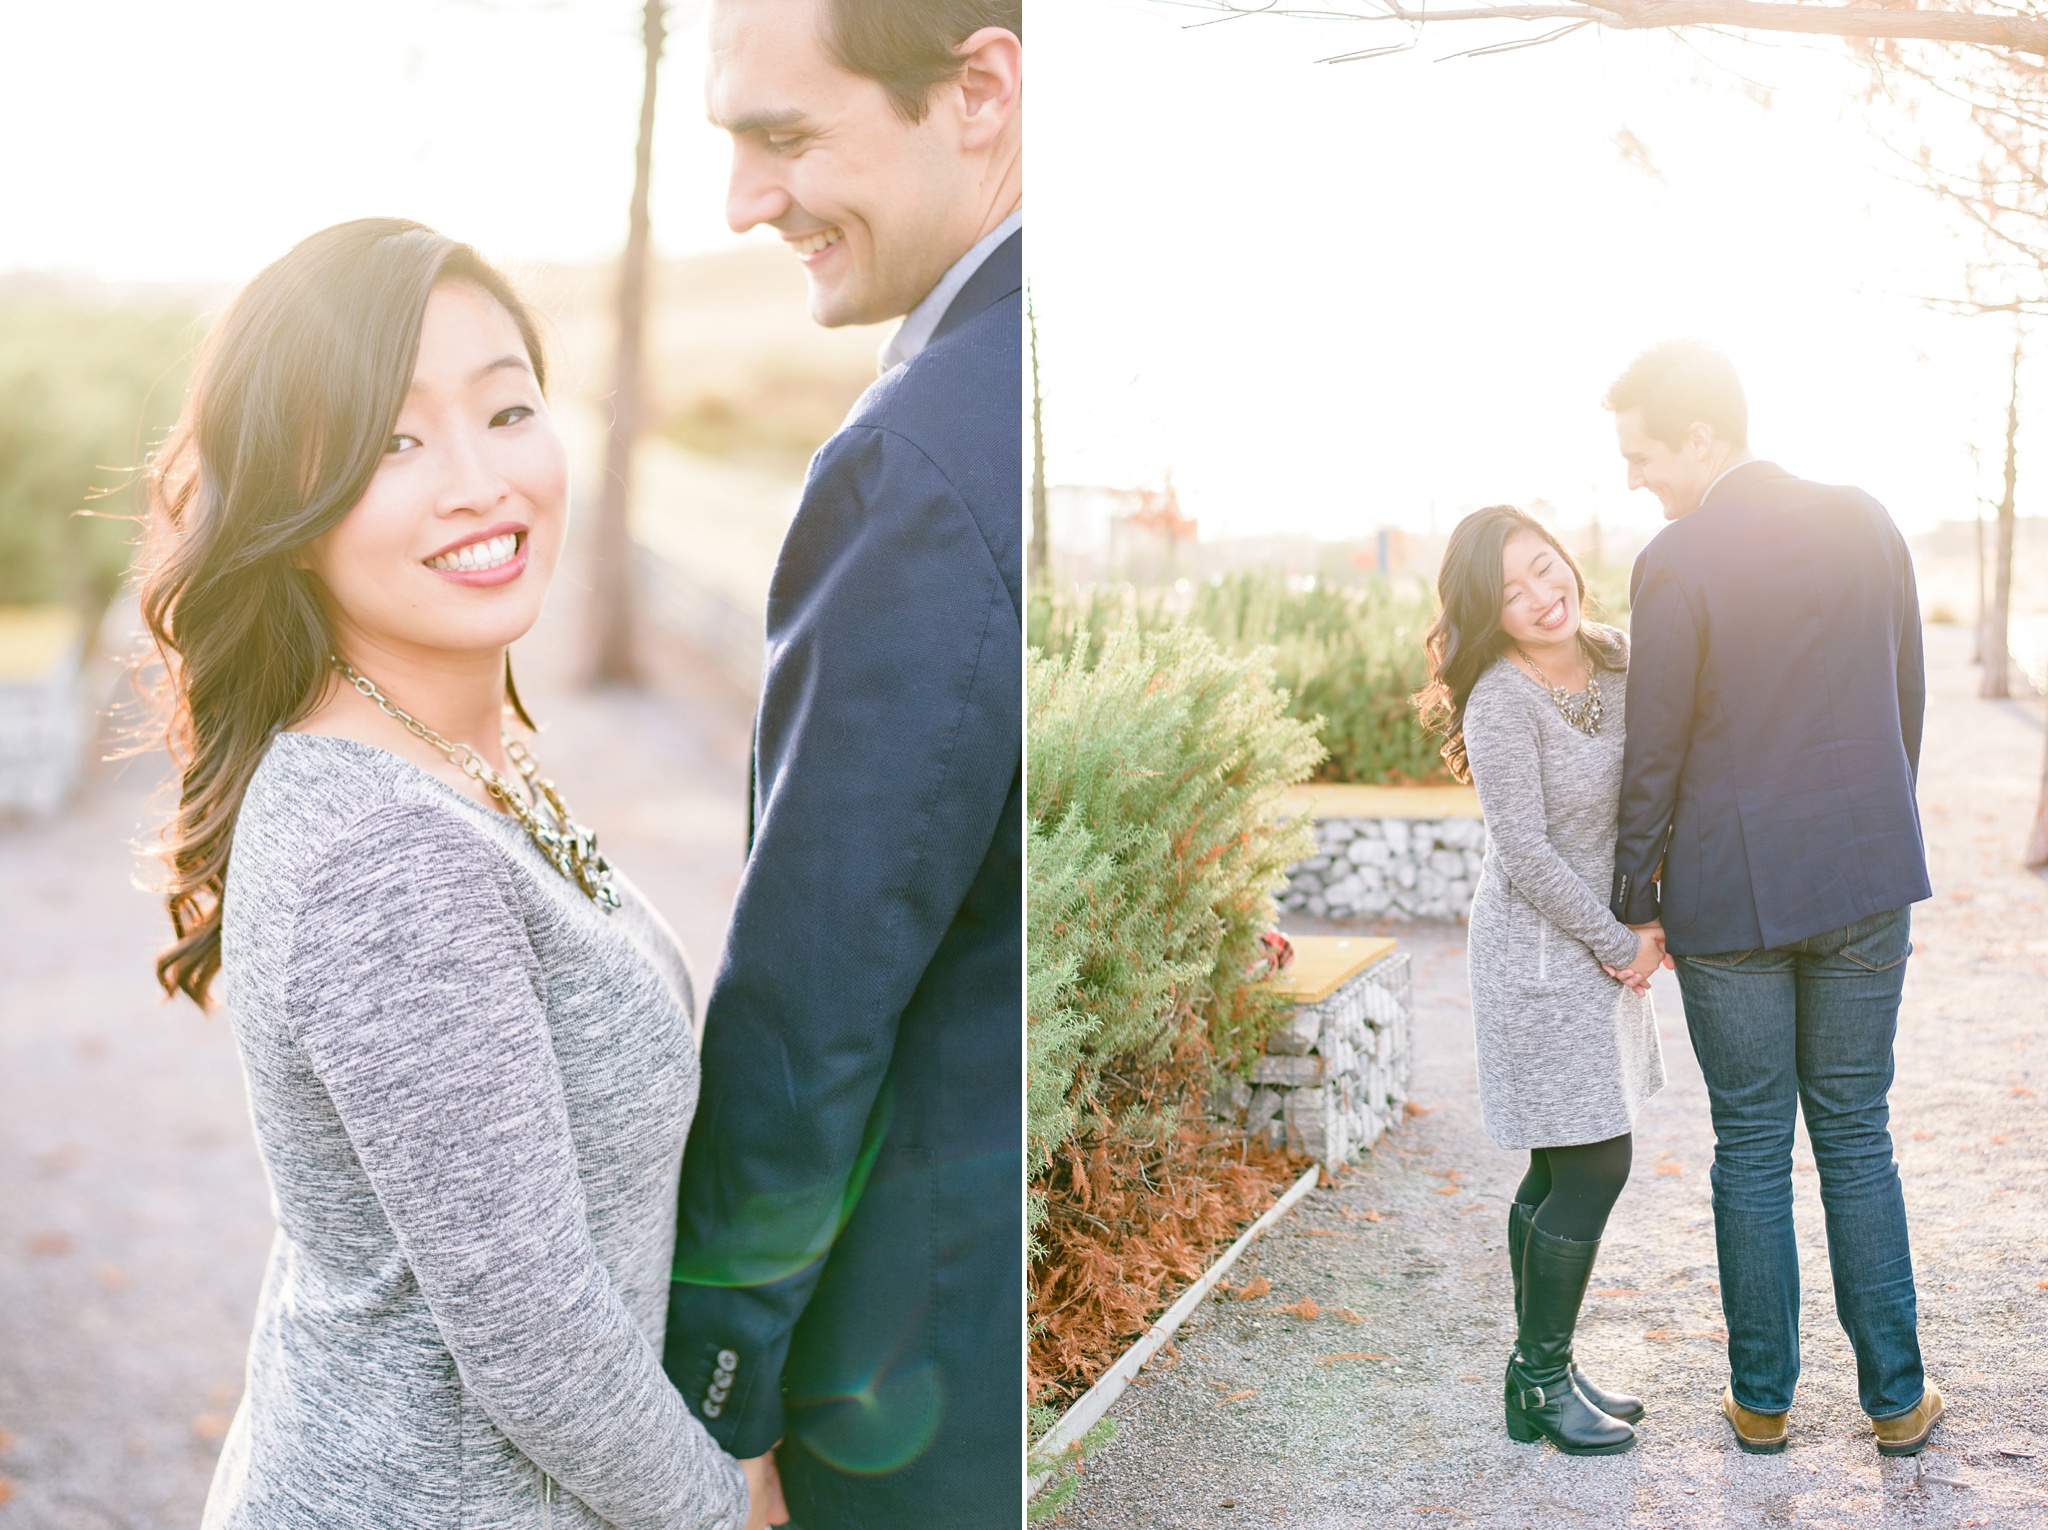 Downtown Nice to Have You in Birmingham Engagement Session| Birmingham Alabama Wedding Photographers_0023.jpg